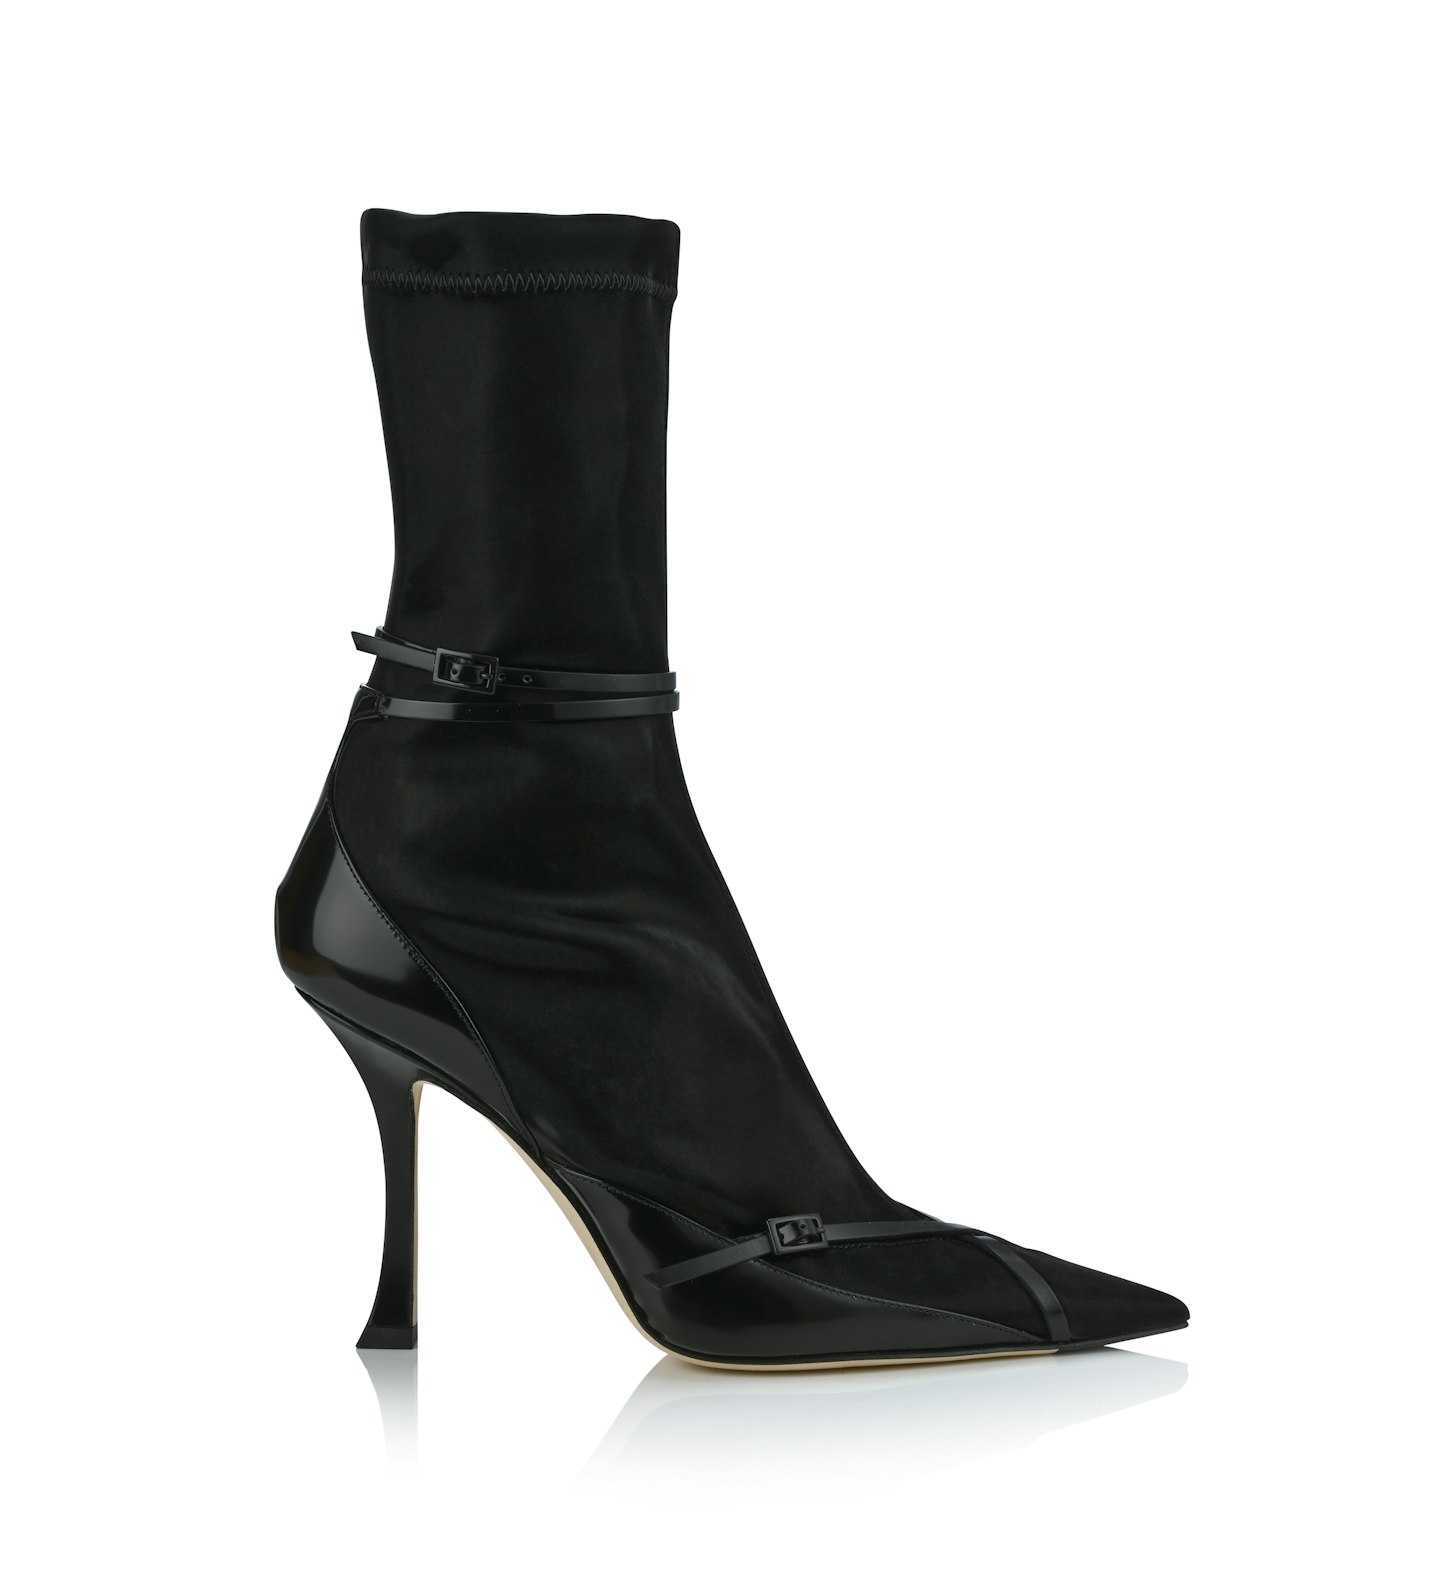 Jimmy Choo Mugler Black Techno Jersey and Spazzolato Ankle Boots with Straps, £950